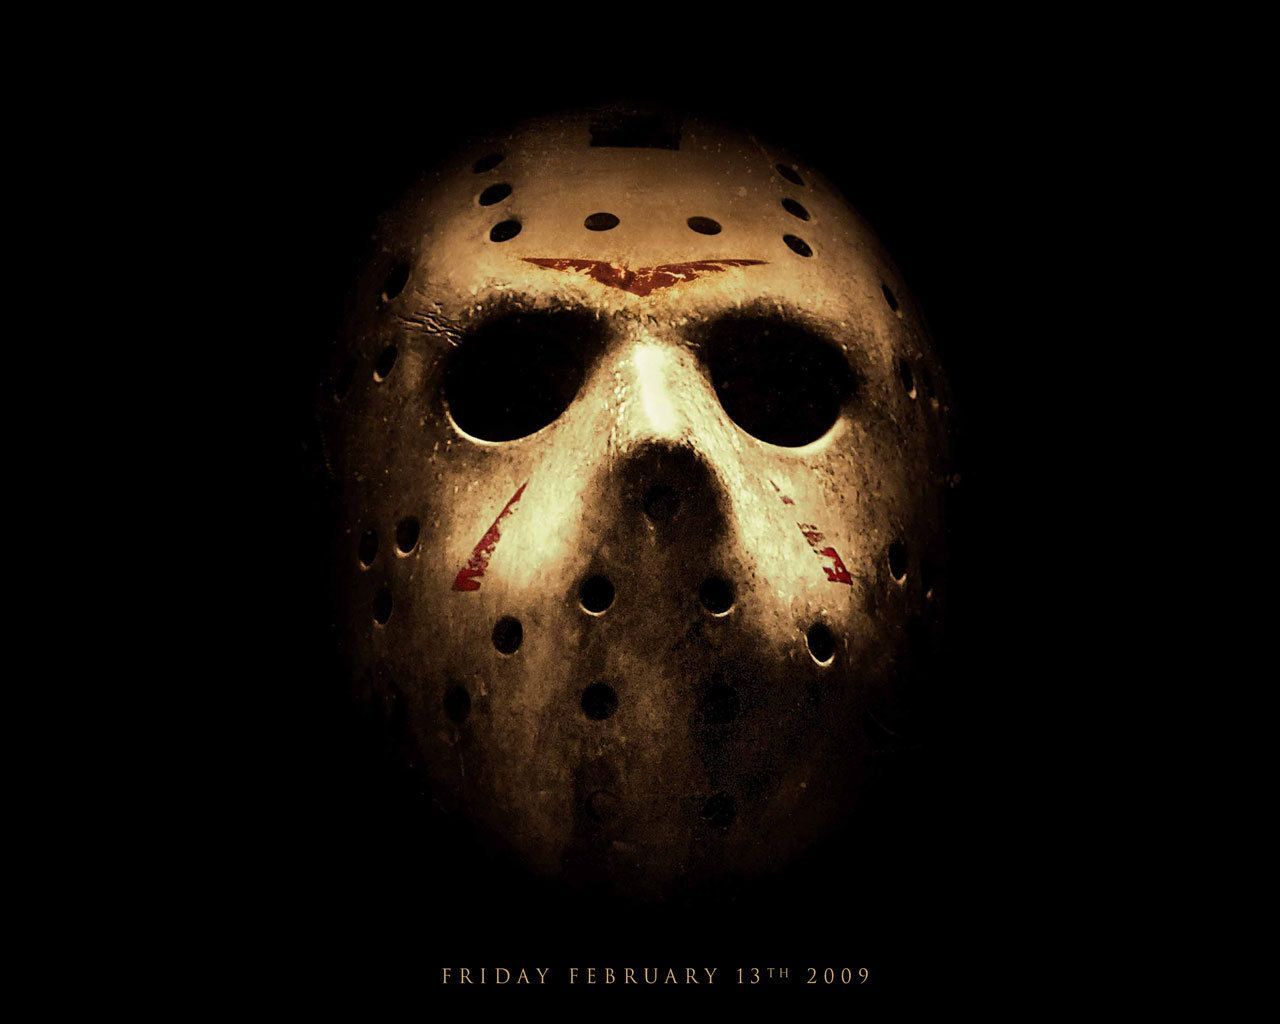 New Friday the 13th wallpaper - Horror Movies Wallpaper 2653137